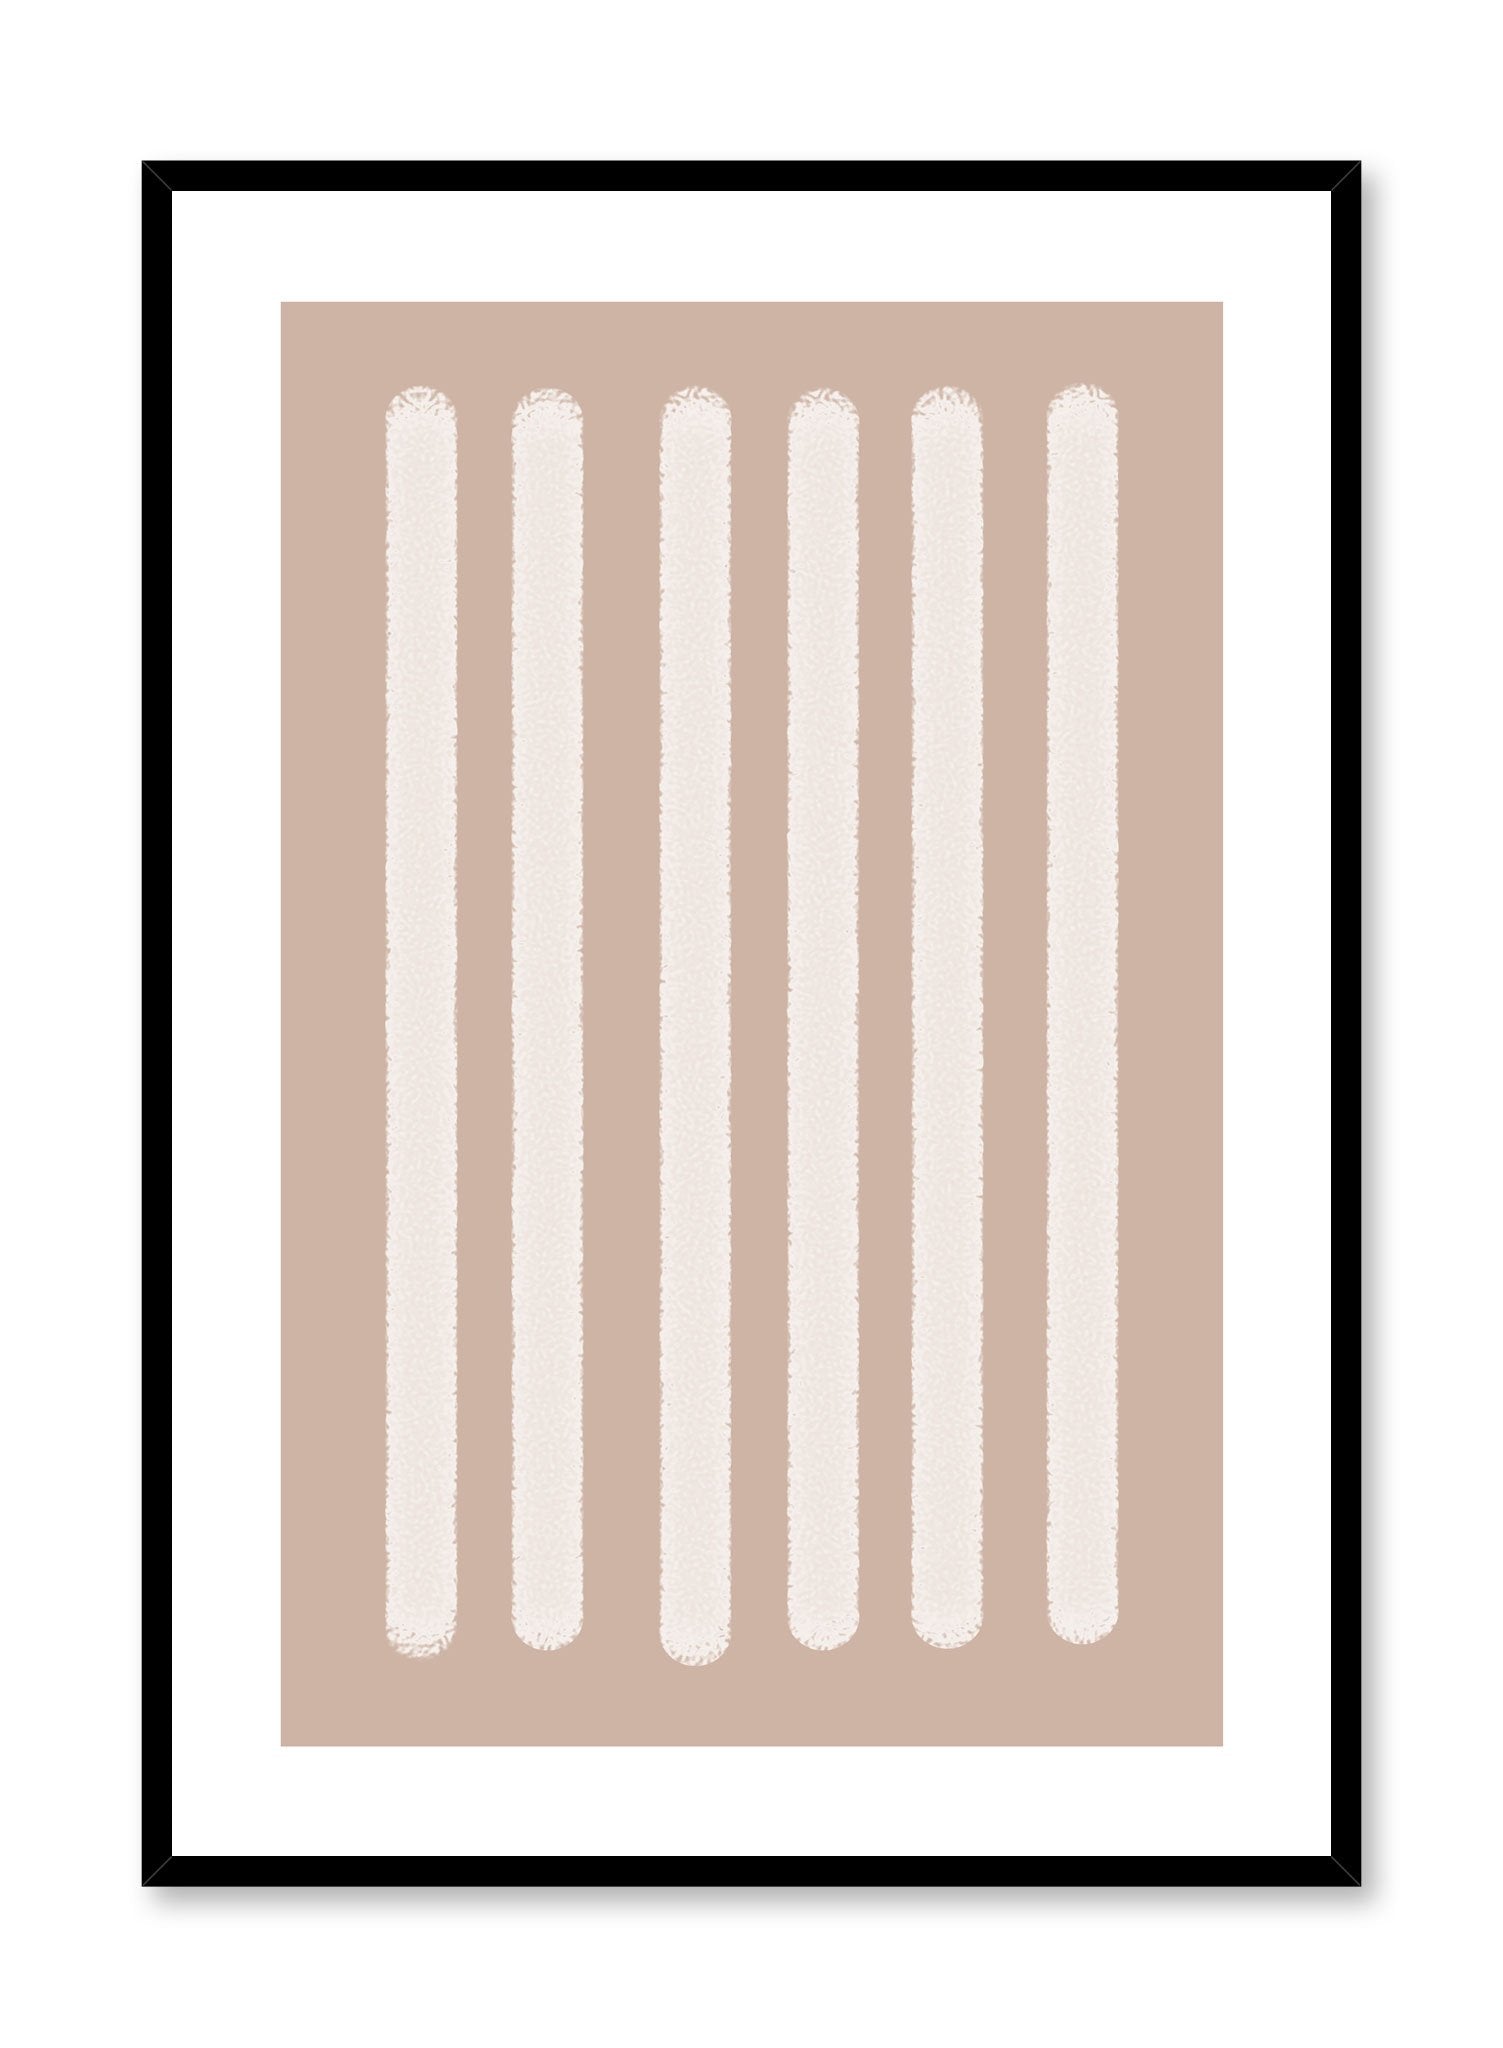 Minimalist design poster by Opposite Wall with abstract beige rectangle shapes